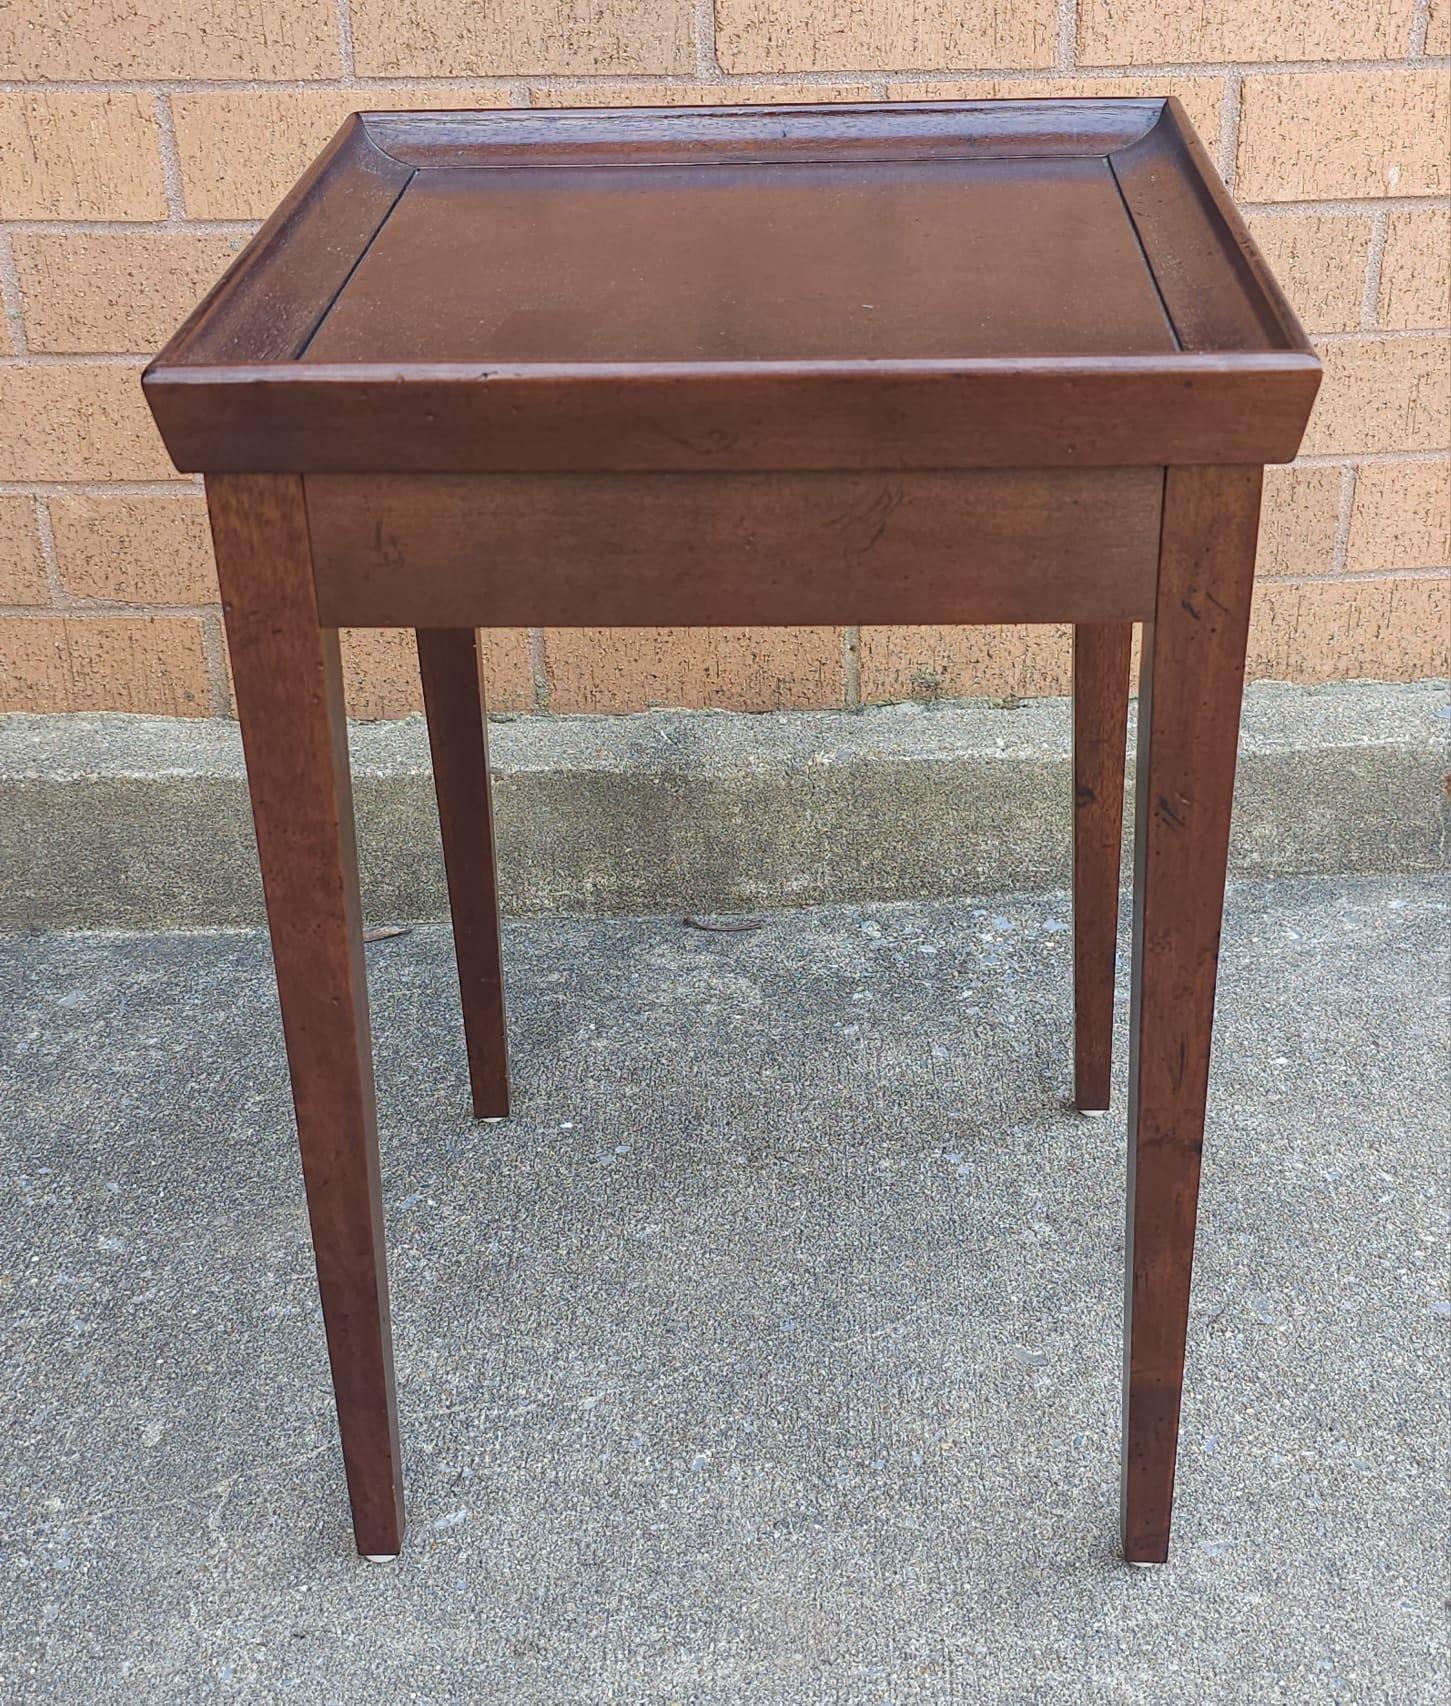 A Late 20th Federal Style Mahohany Side Table
Measures 14.75